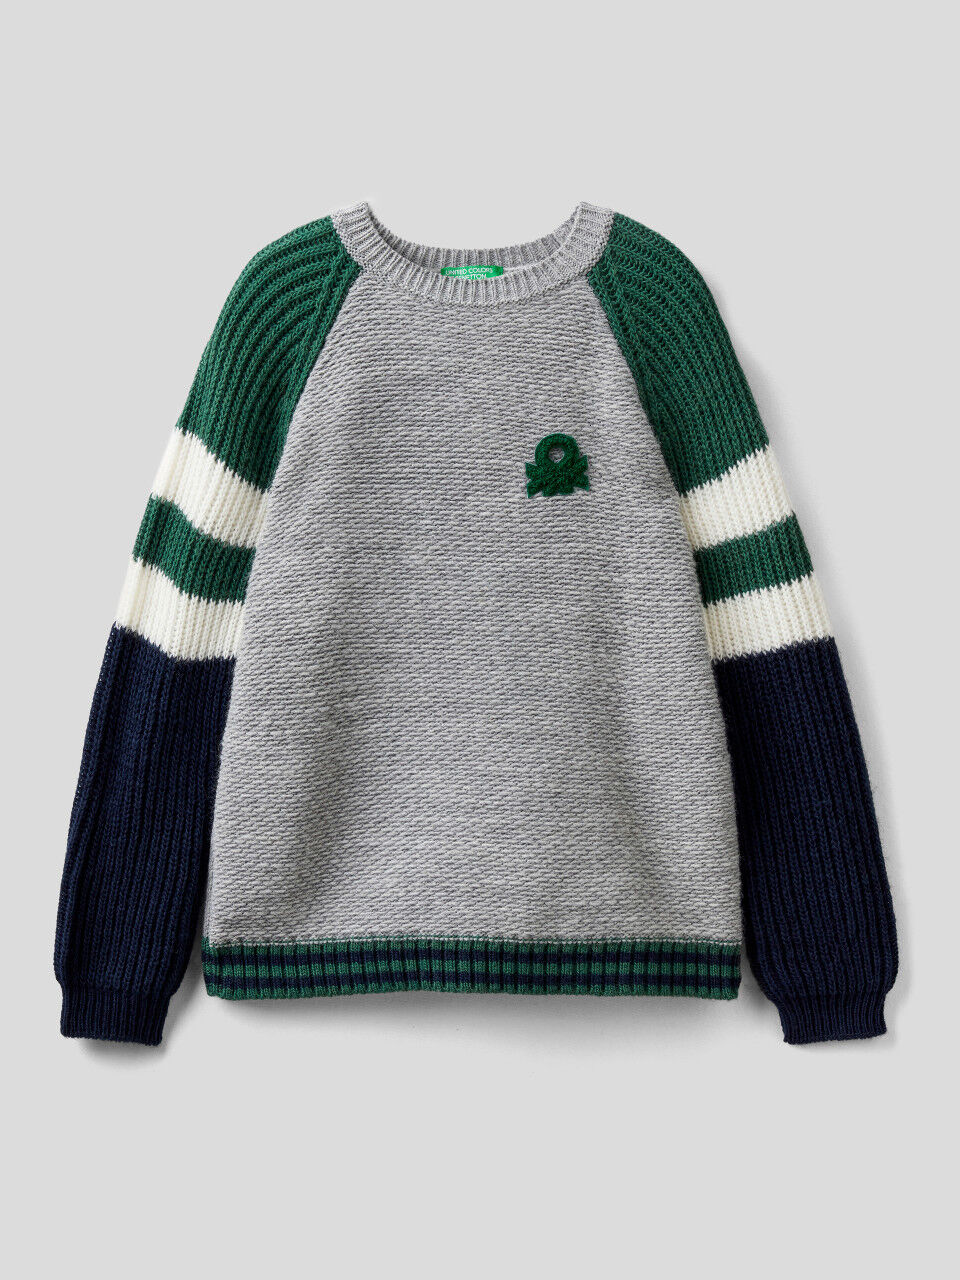 Sweater UNITED COLORS OF BENETTON 9-10 yea Sweaters  United Colors of Benetton Kids Kids Boys United Colors of Benetton Clothing United Colors of Benetton Kids Sweaters & Cardigans United Colors of Benetton Kids Sweaters  United Colors of Benetton Kids 